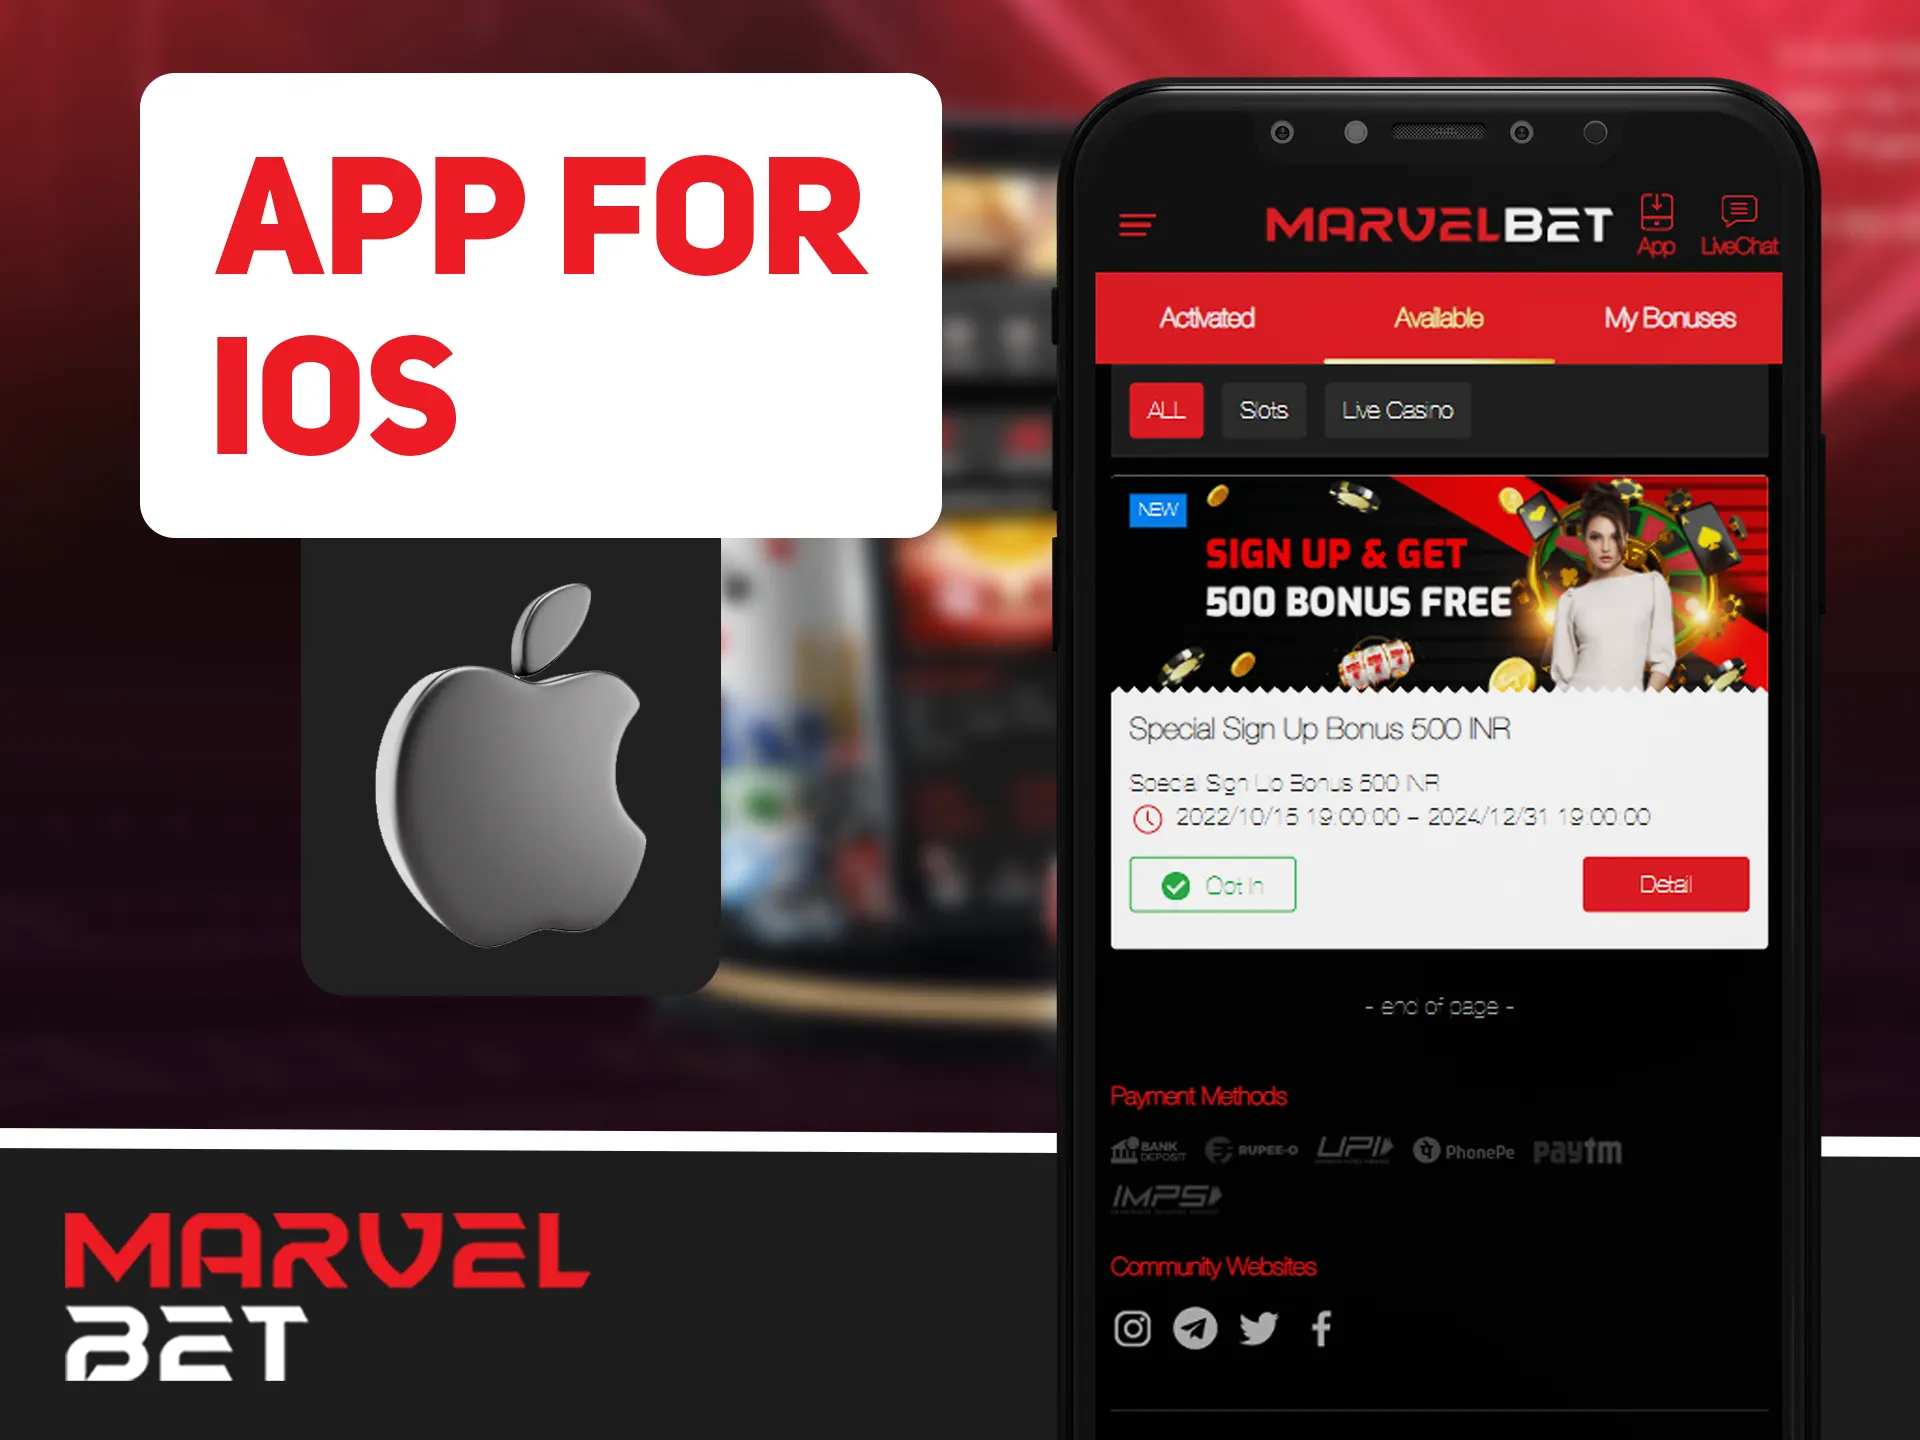 Install Marvelbet app on your iOS device.